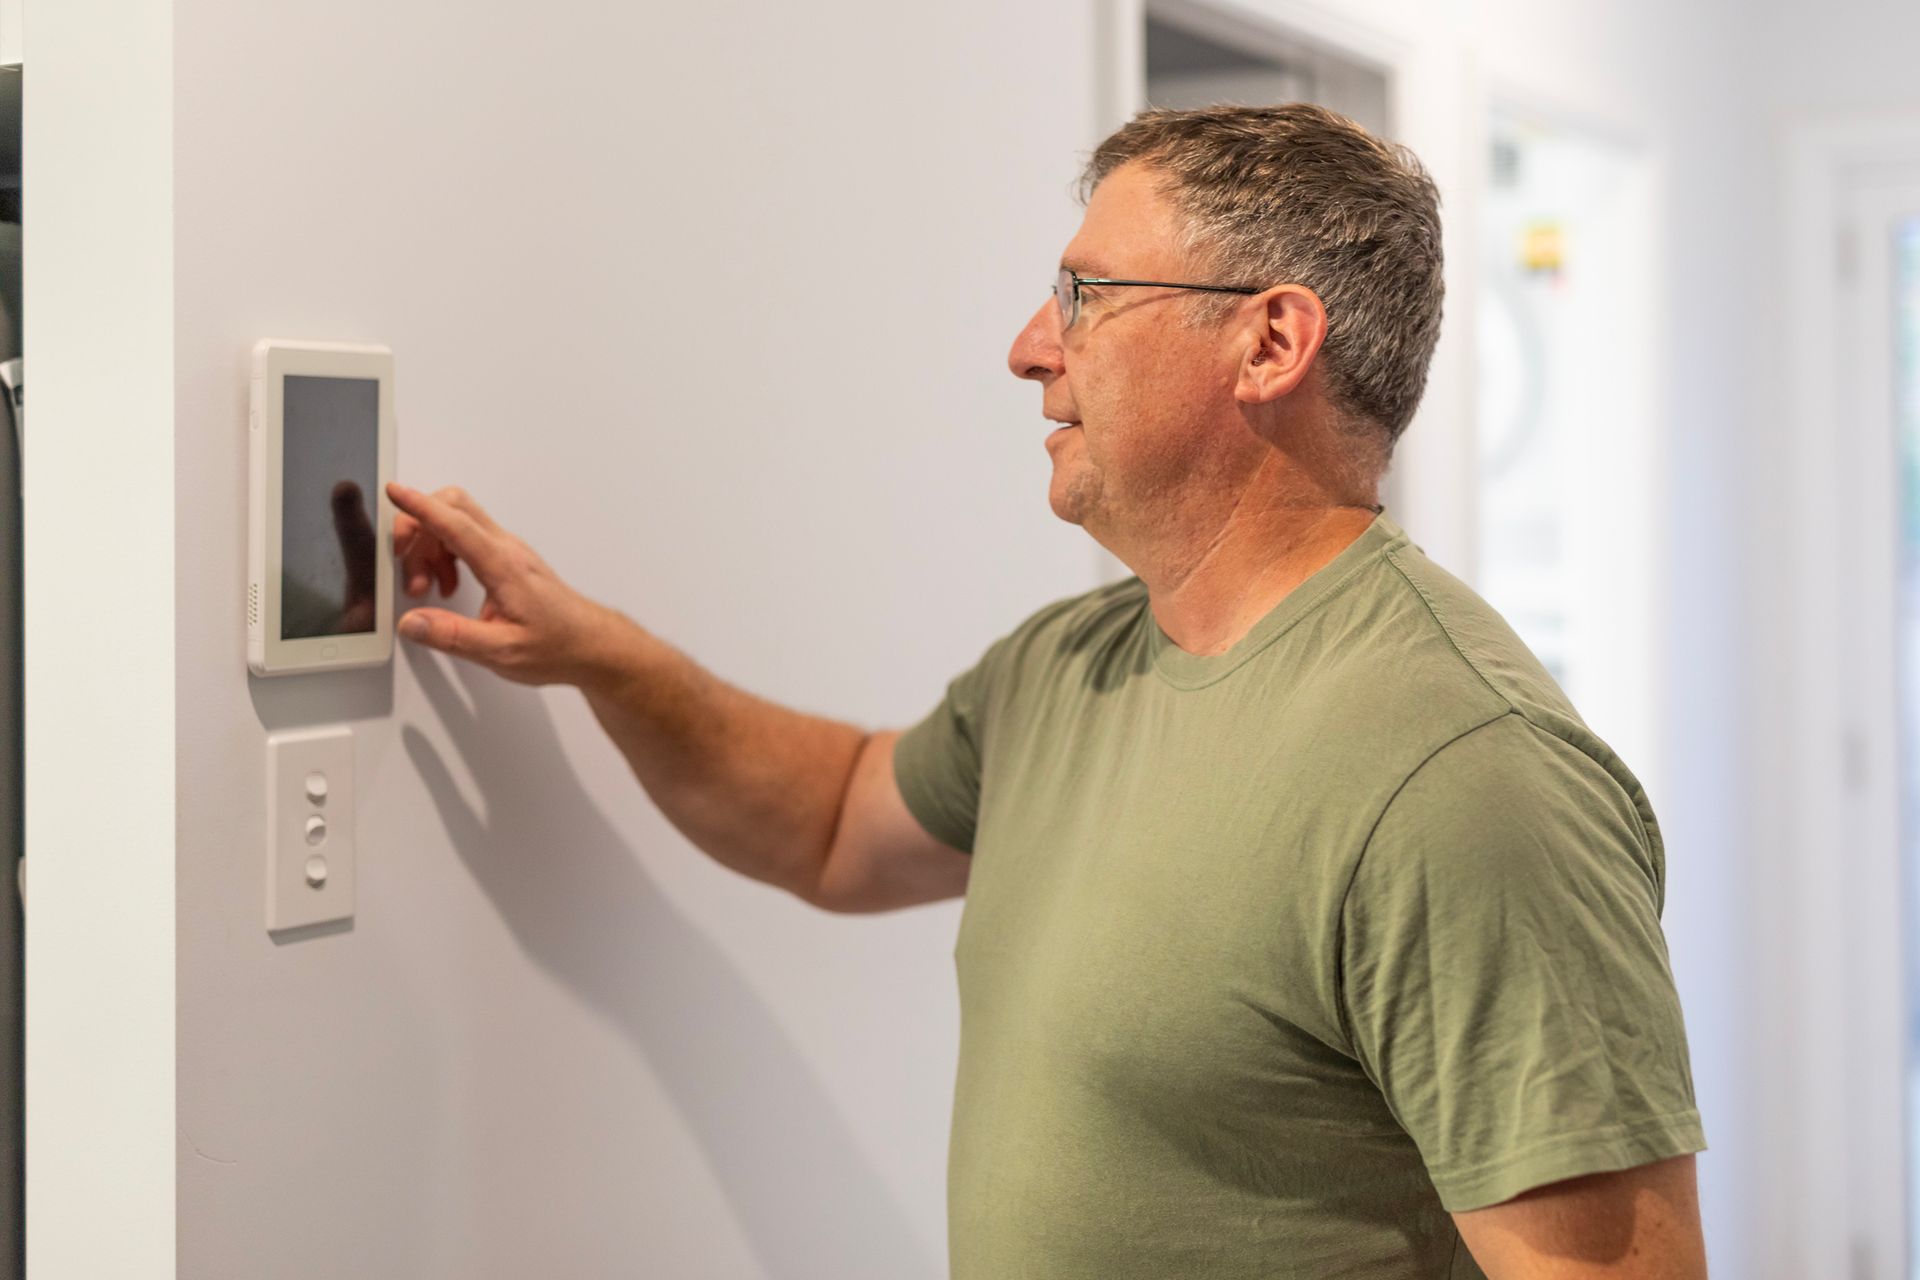 Man using smart air condition controller that sits on wall